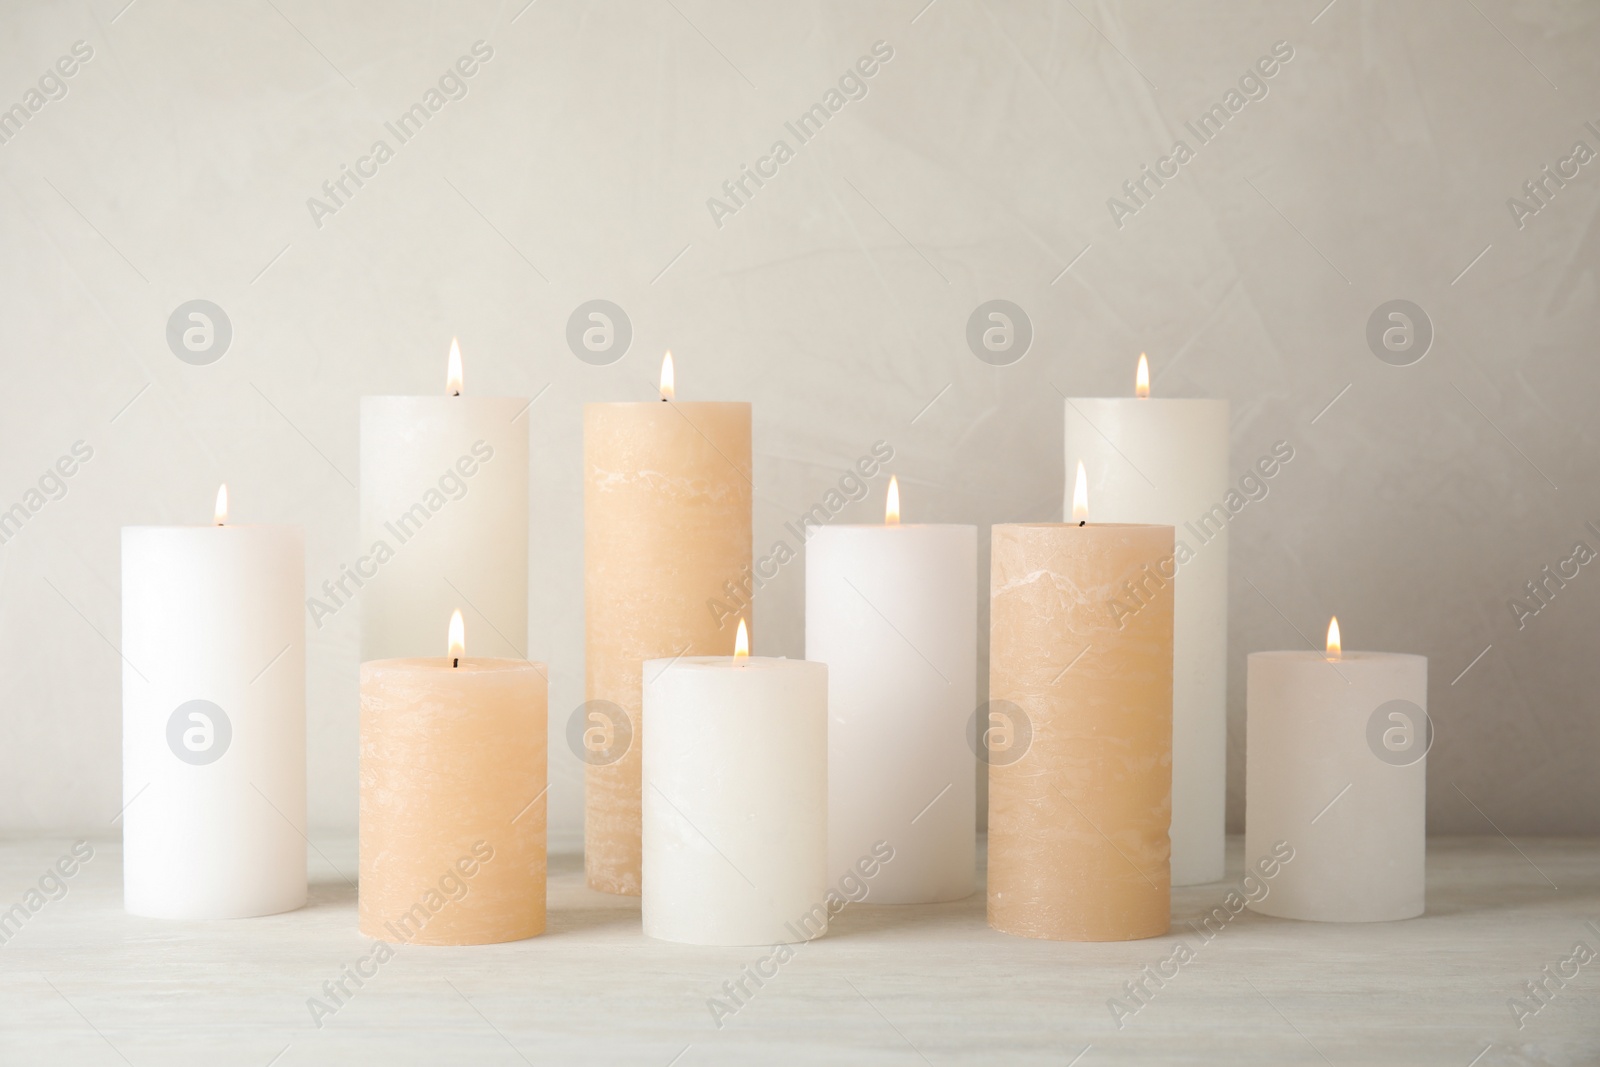 Photo of Burning candles on table against light background